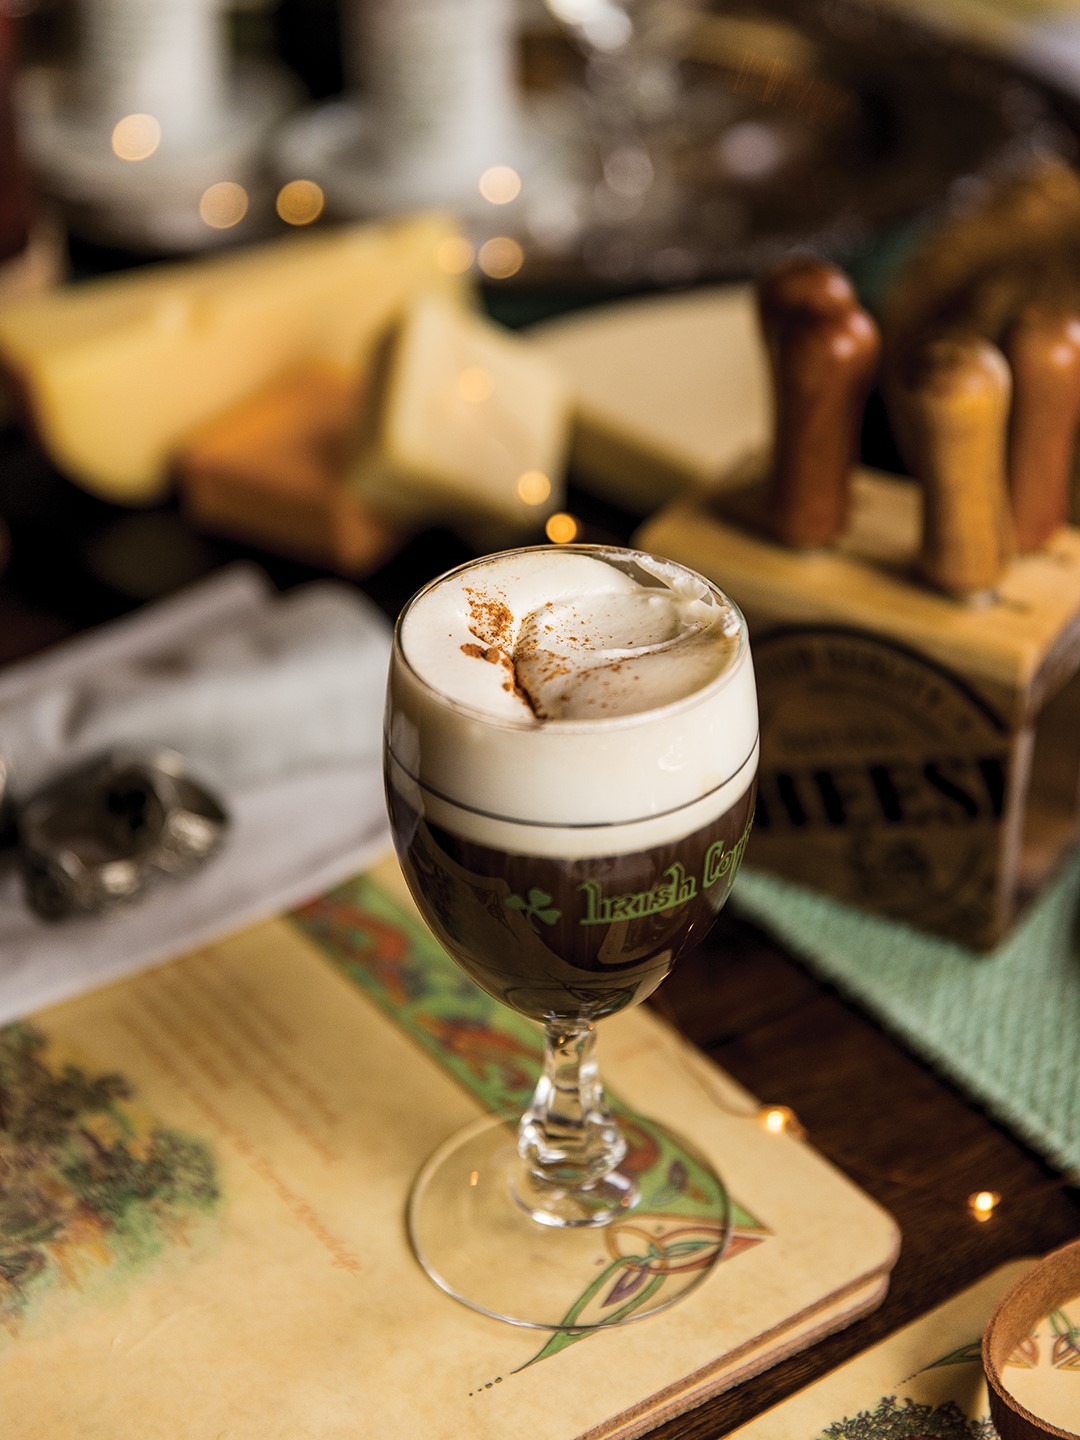 Irish Coffee, complete with Irish whiskey, is a staple in the culture.